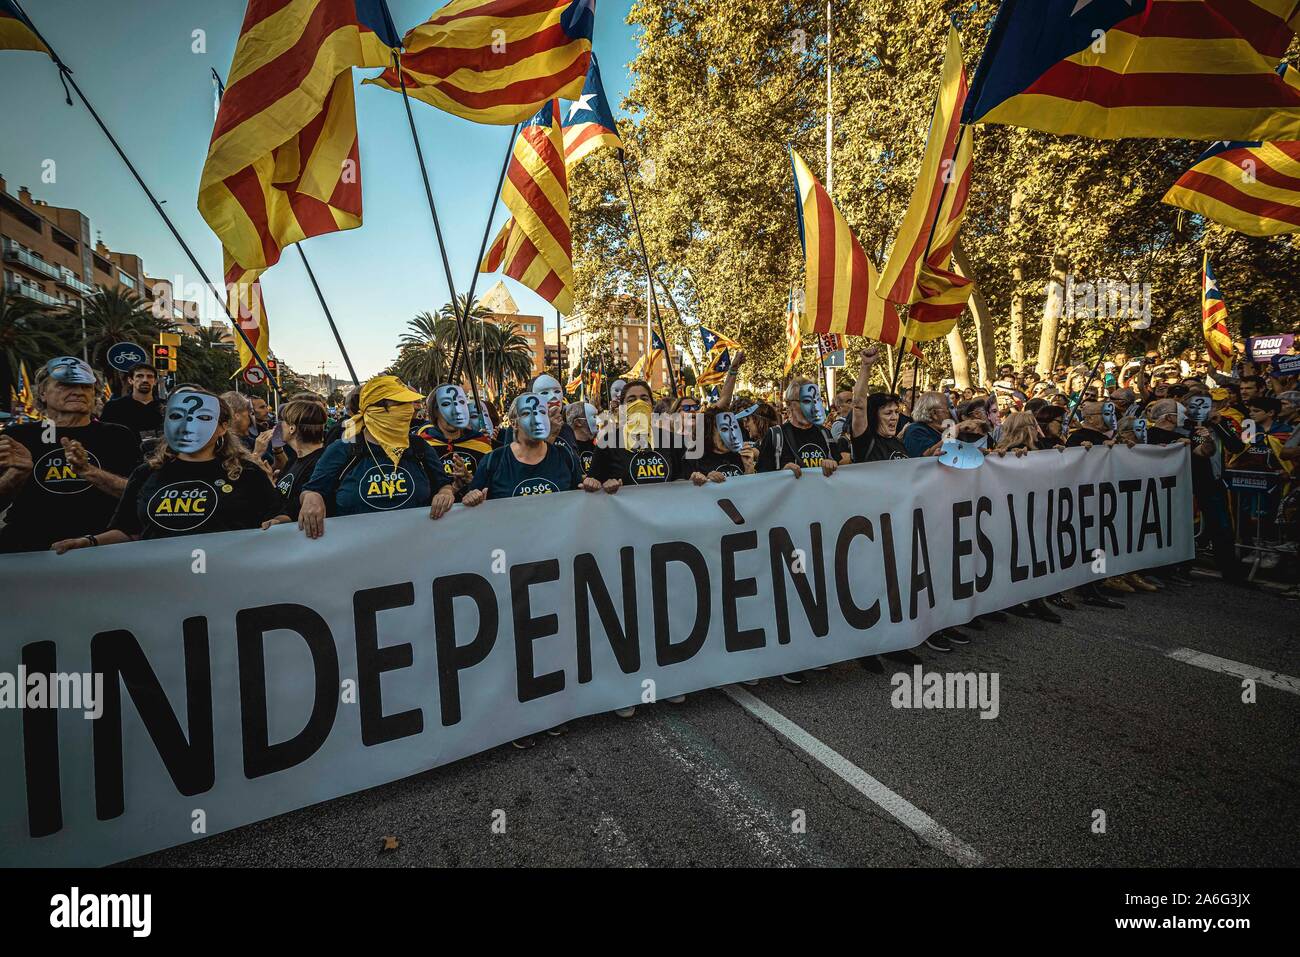 Barcelona, Spain. 26 October, 2019:  Catalan separatists march behind their banner as they demand 'freedom' after the Supreme Court's verdict against 9 of 12 Catalan leaders for sedition, misuse of public funds and desobedience in relation with a banned referendum on secession and an independence vote at the Catalan Parliament in October 2017. Stock Photo